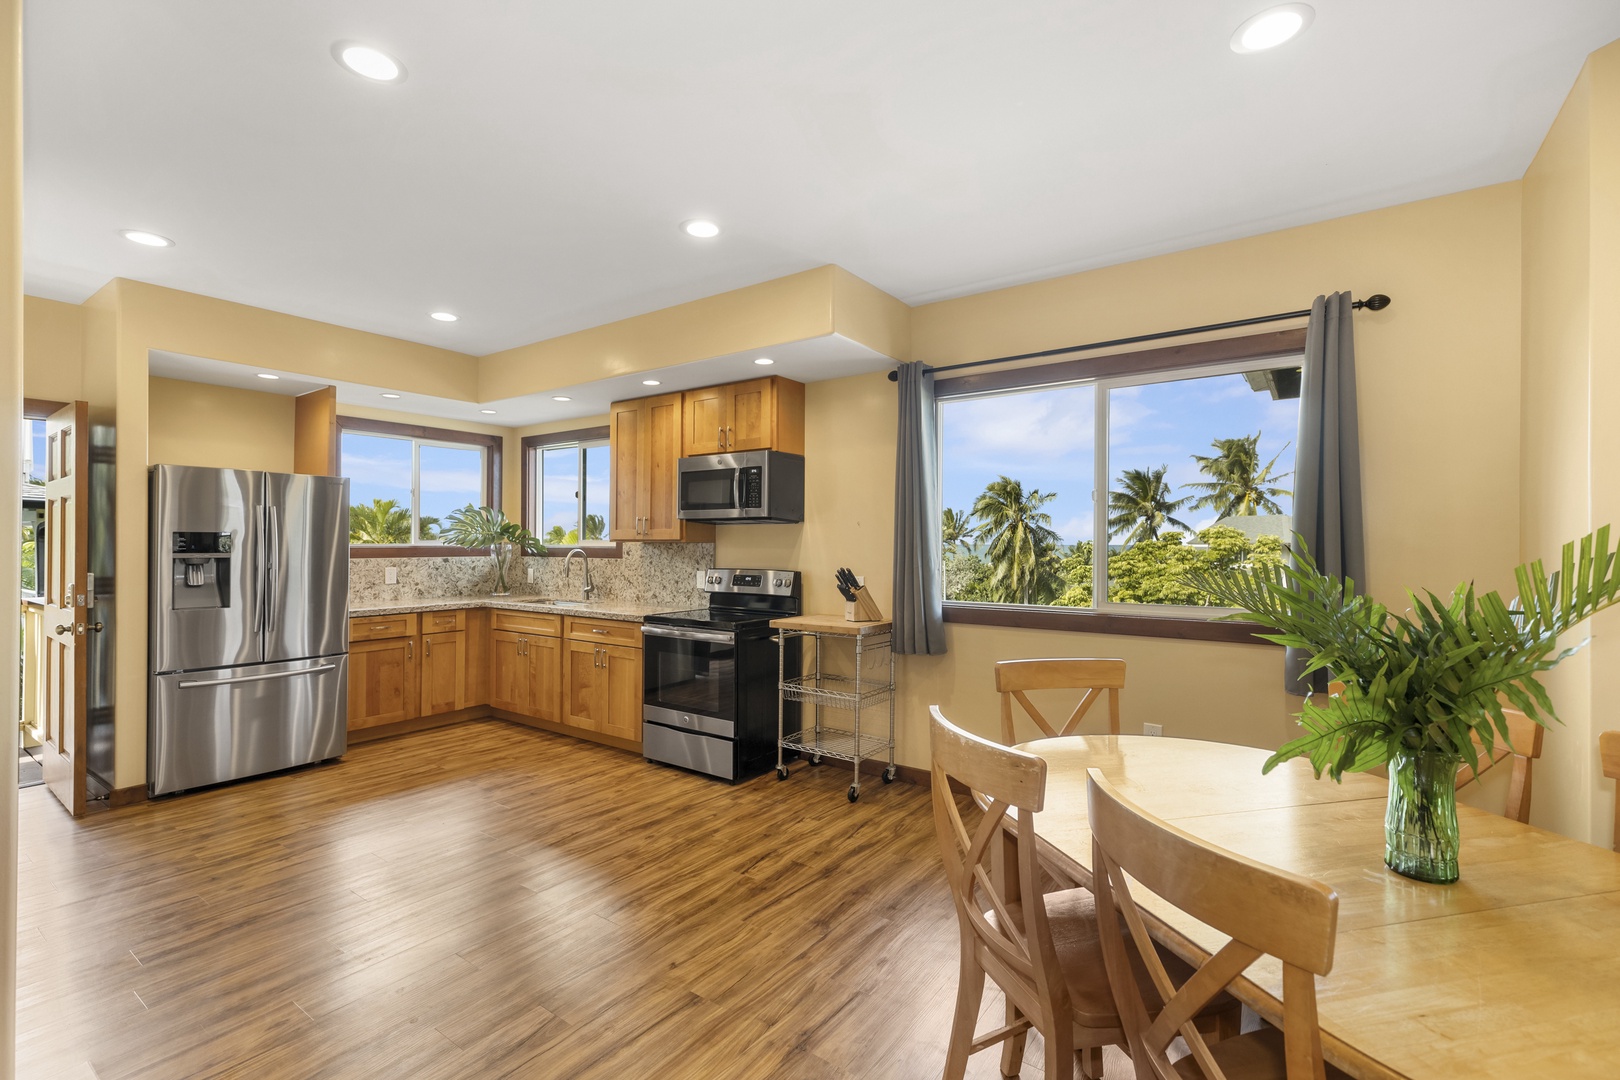 Haleiwa Vacation Rentals, Waimea Dream - The well-appointed upstairs kitchen features ocean views.